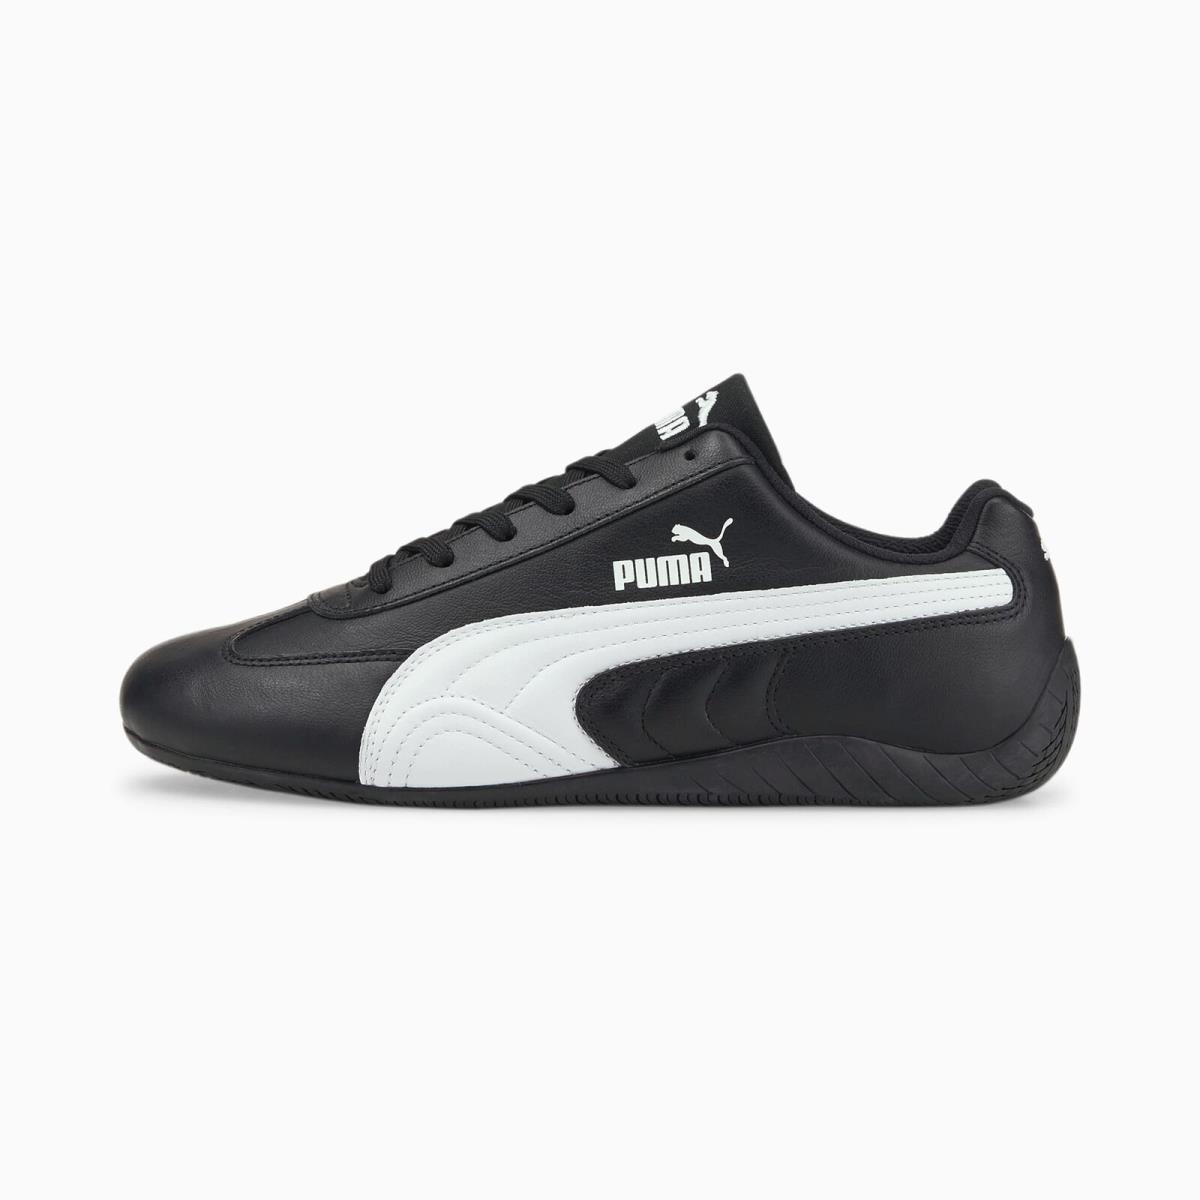 Puma Speedcat Shield Leather Driving Shoes